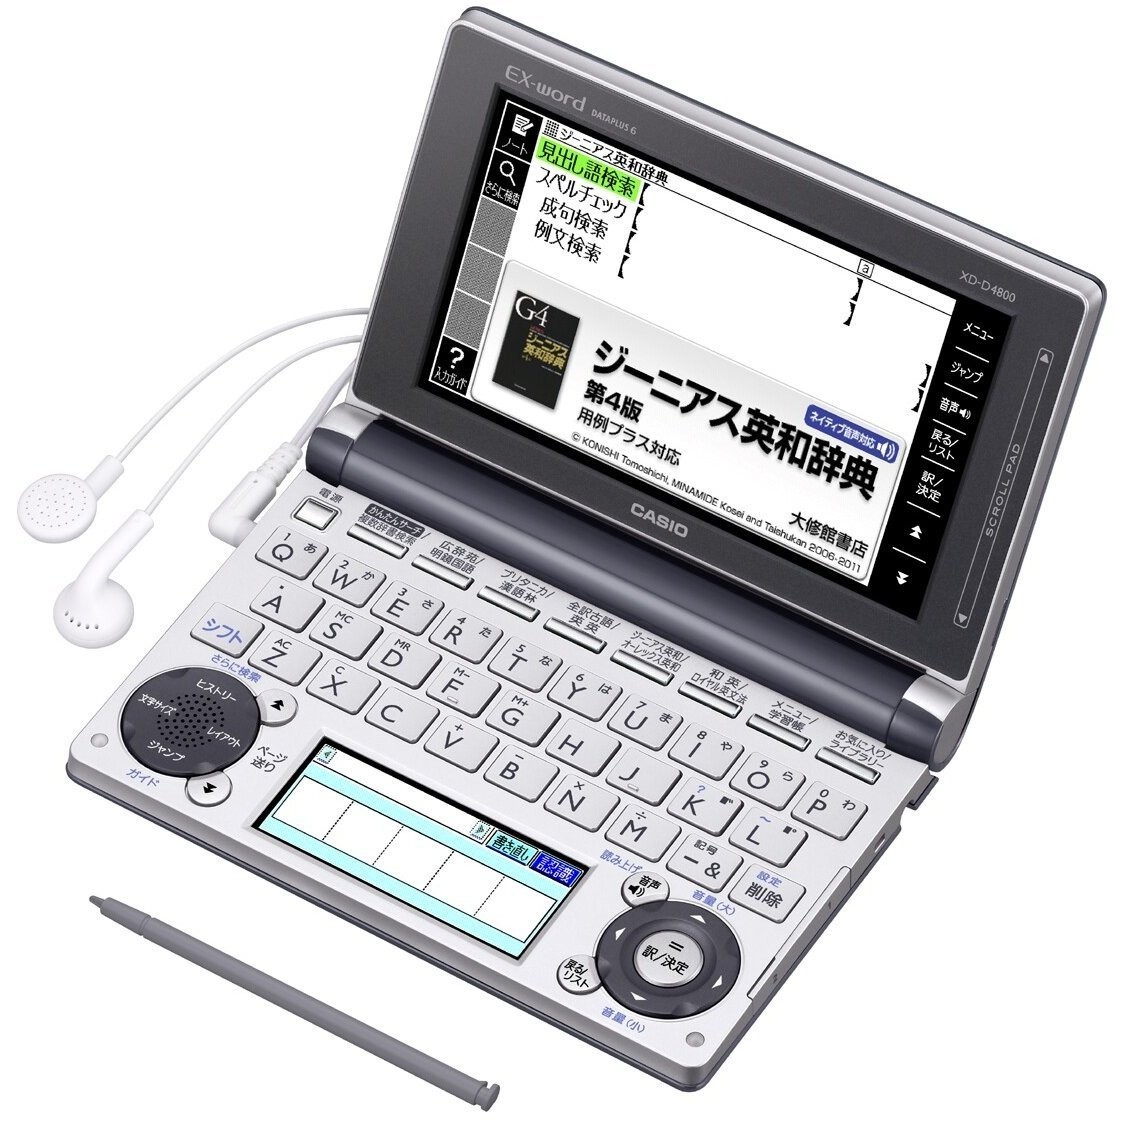 CASIO EX-word XD-D4800GM Japanese English Electronic